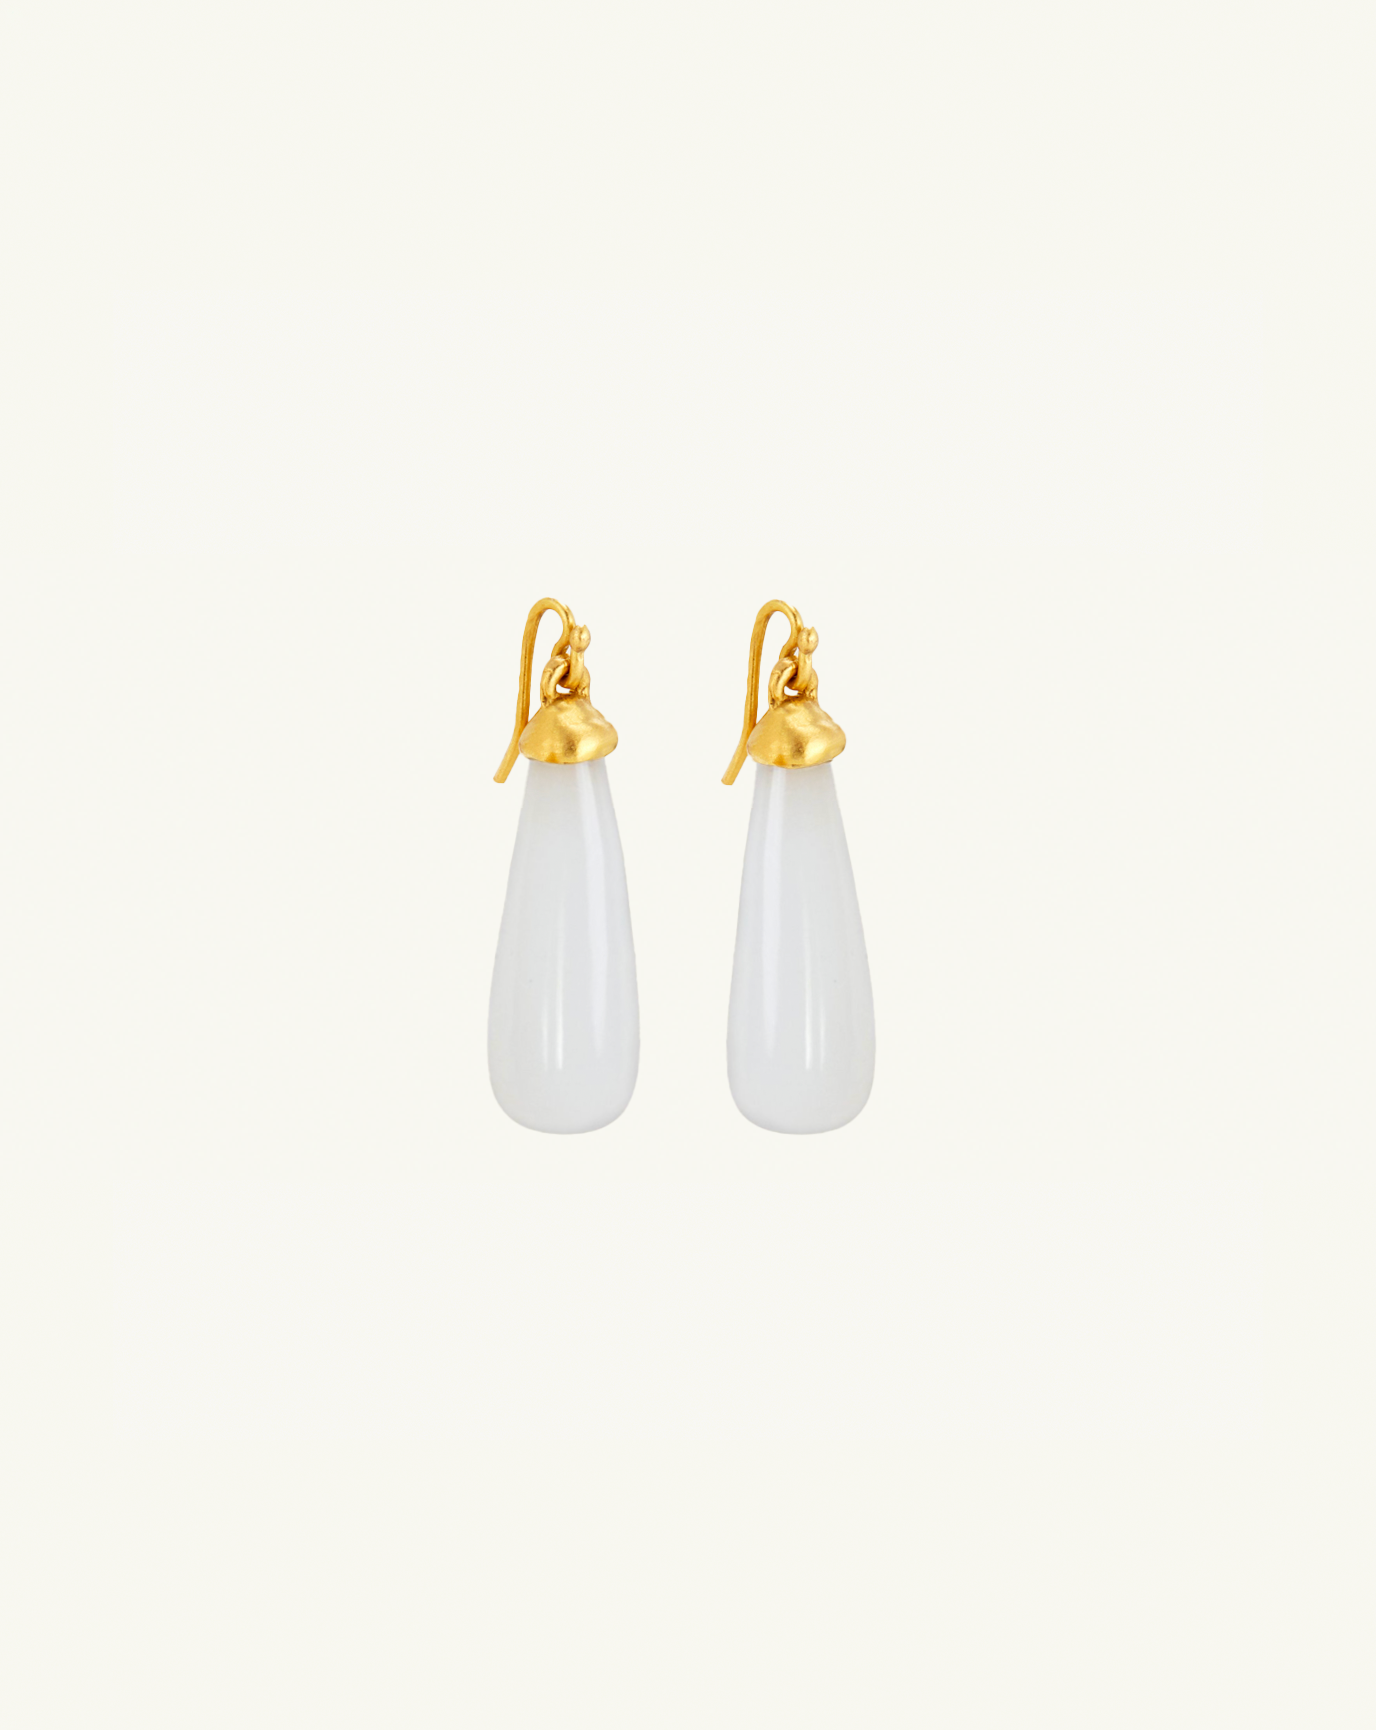 Product image of the white moonstone drop earrings